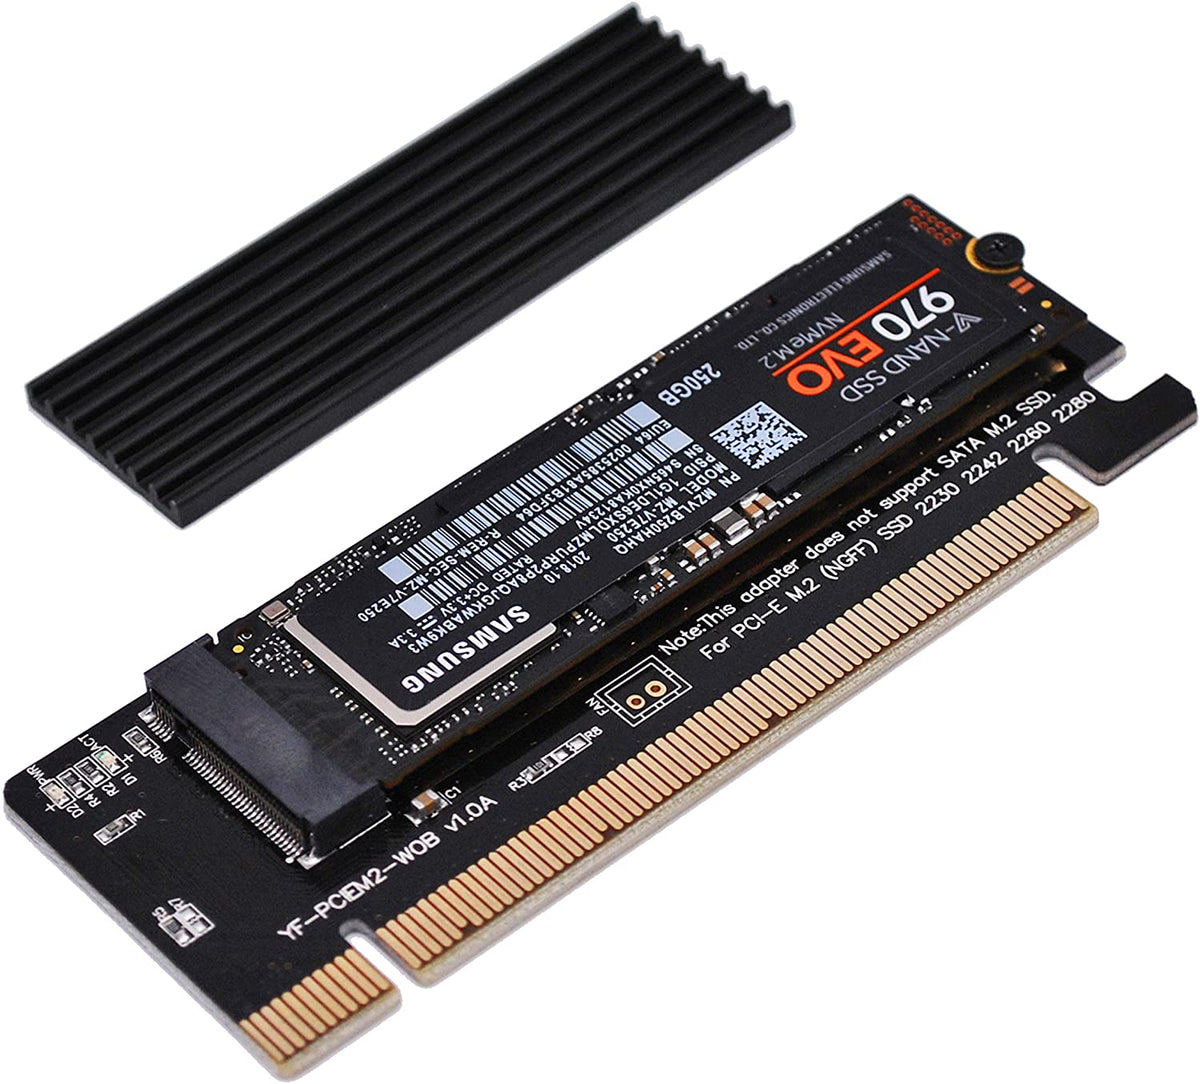 SSD NVMe M2MOVESPEED 7450MB/s PCIe4.0 SSD free shipping on Aliexpress